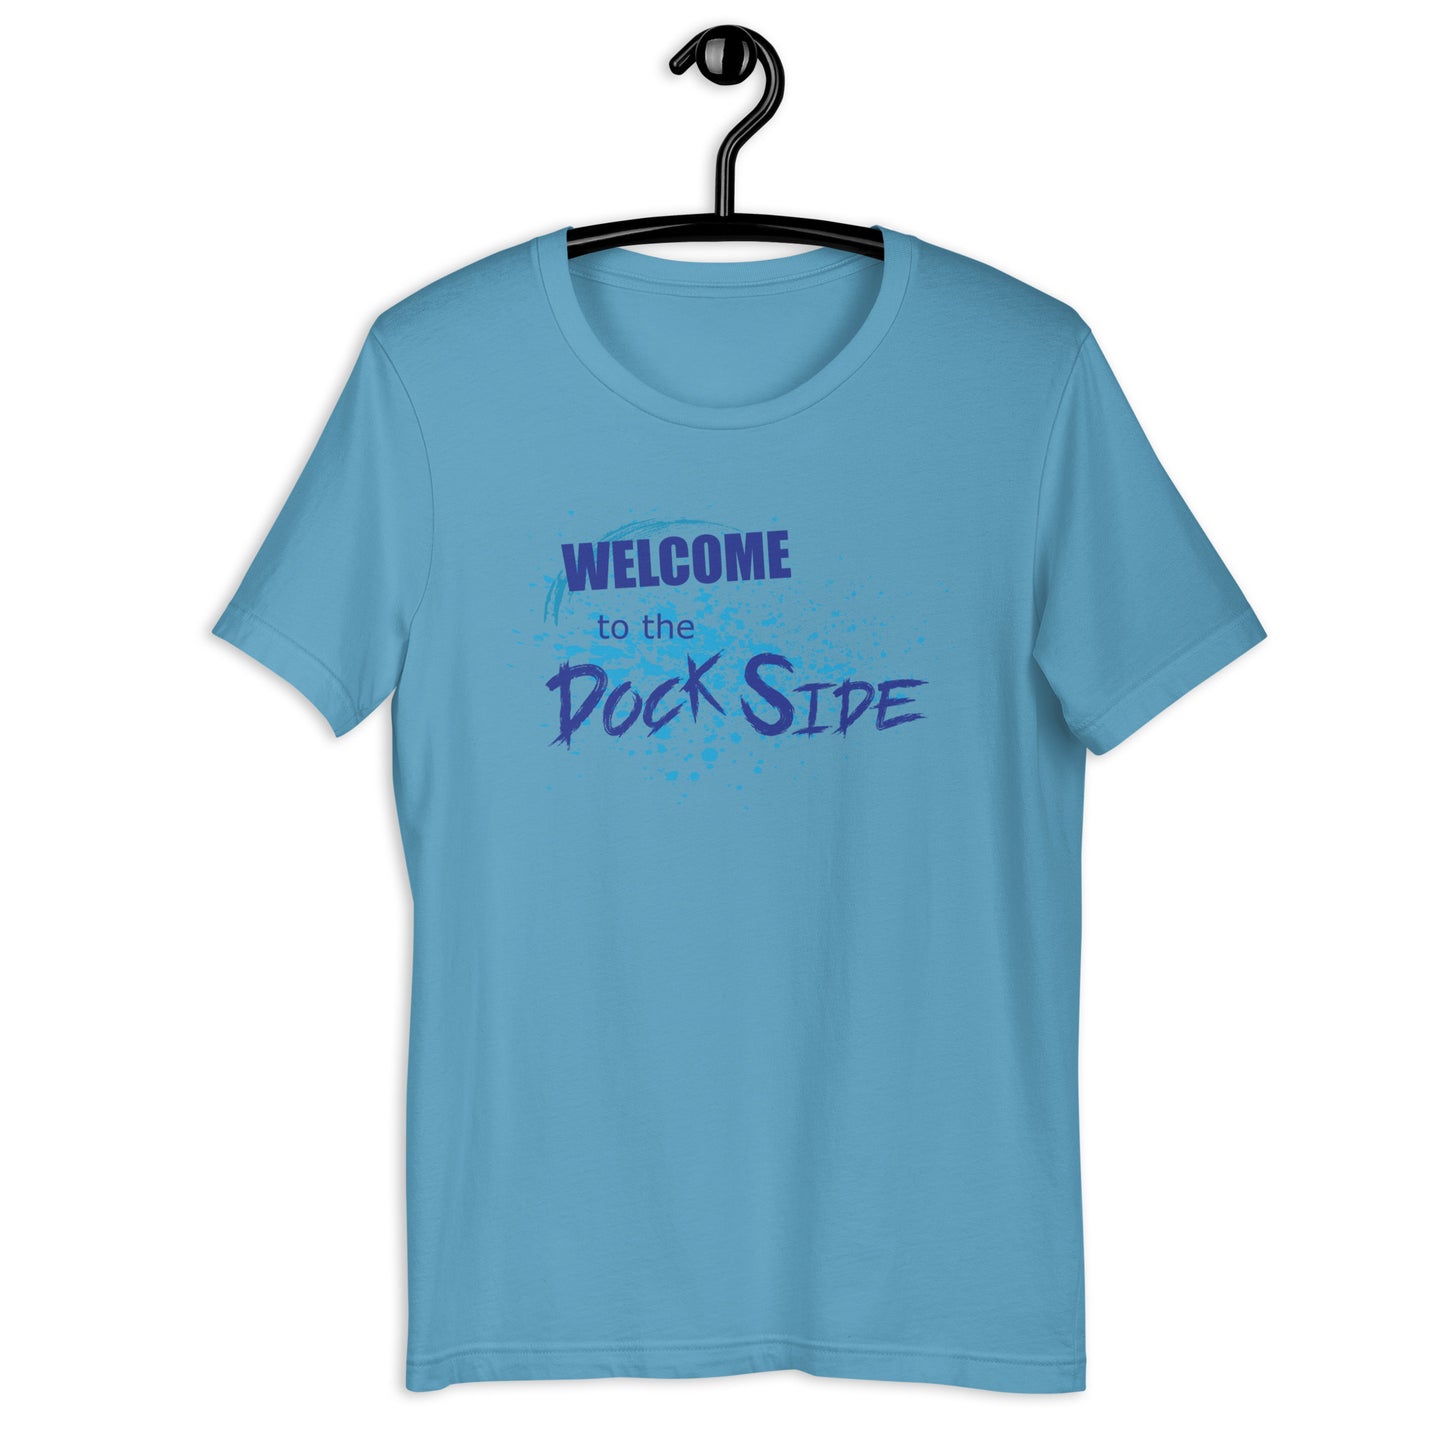 WELCOME TO THE DOCK SIDE - Unisex t-shirt